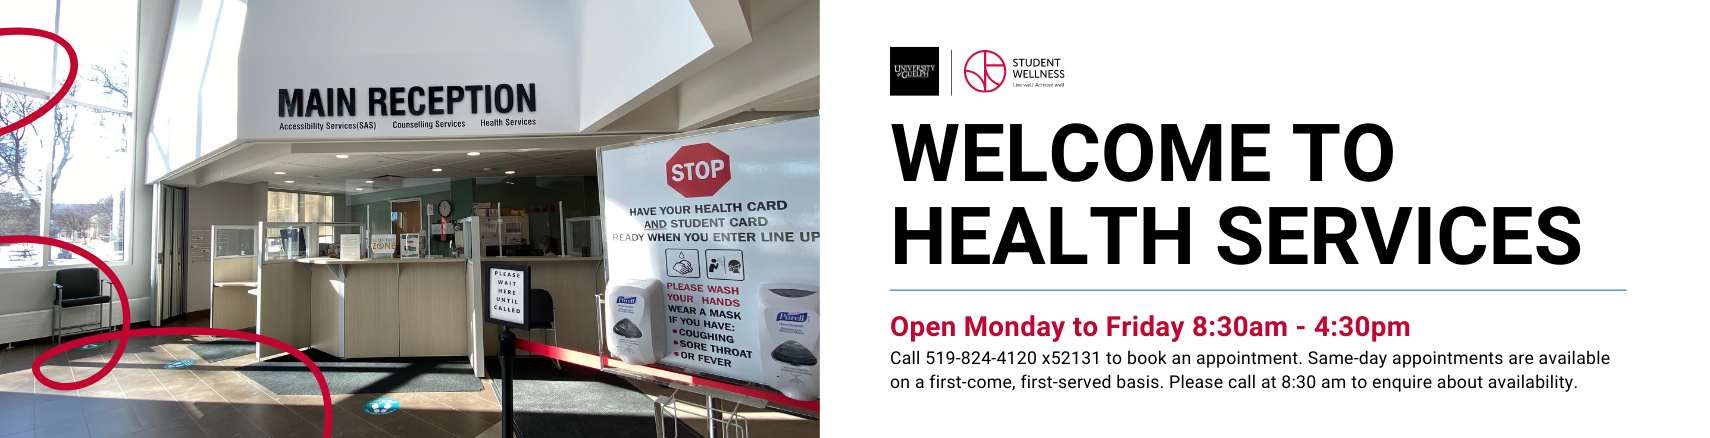 Health services lobby. Welcome to Health Services. Open Monday to Friday 8:30am to 4:30pm To book an appointment, please call reception at 519-824-4120 x52131. Same-day appointments are available on a first-come, first-served basis. 